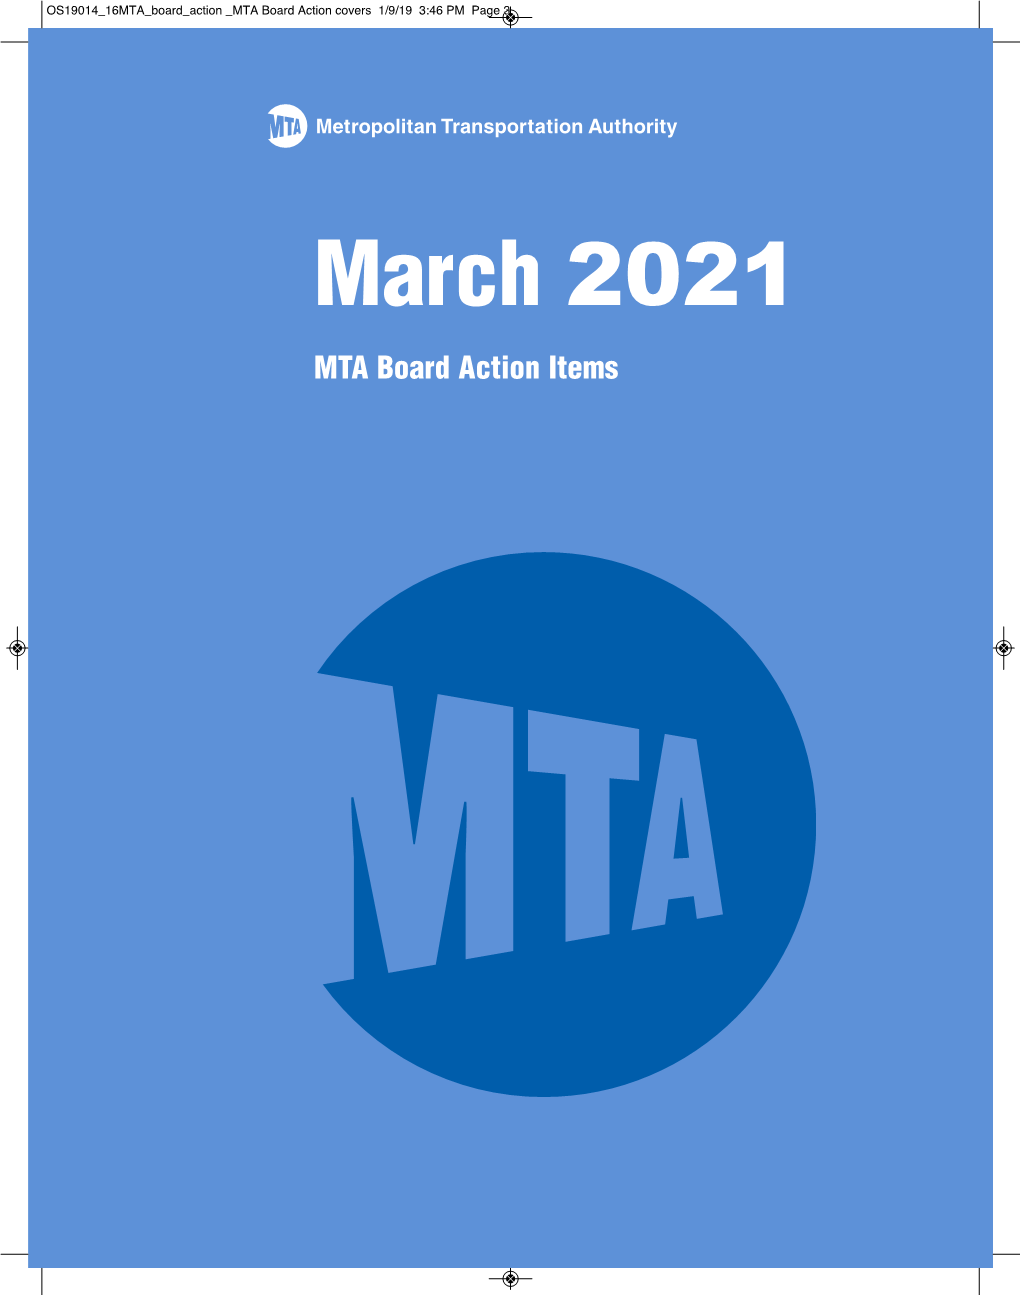 March 2021 MTA Board Action Items MTA Board Meeting 2 Broadway 20Th Floor Board Room New York, NY 10004 Wednesday, 3/17/2021 10:00 AM - 5:00 PM ET